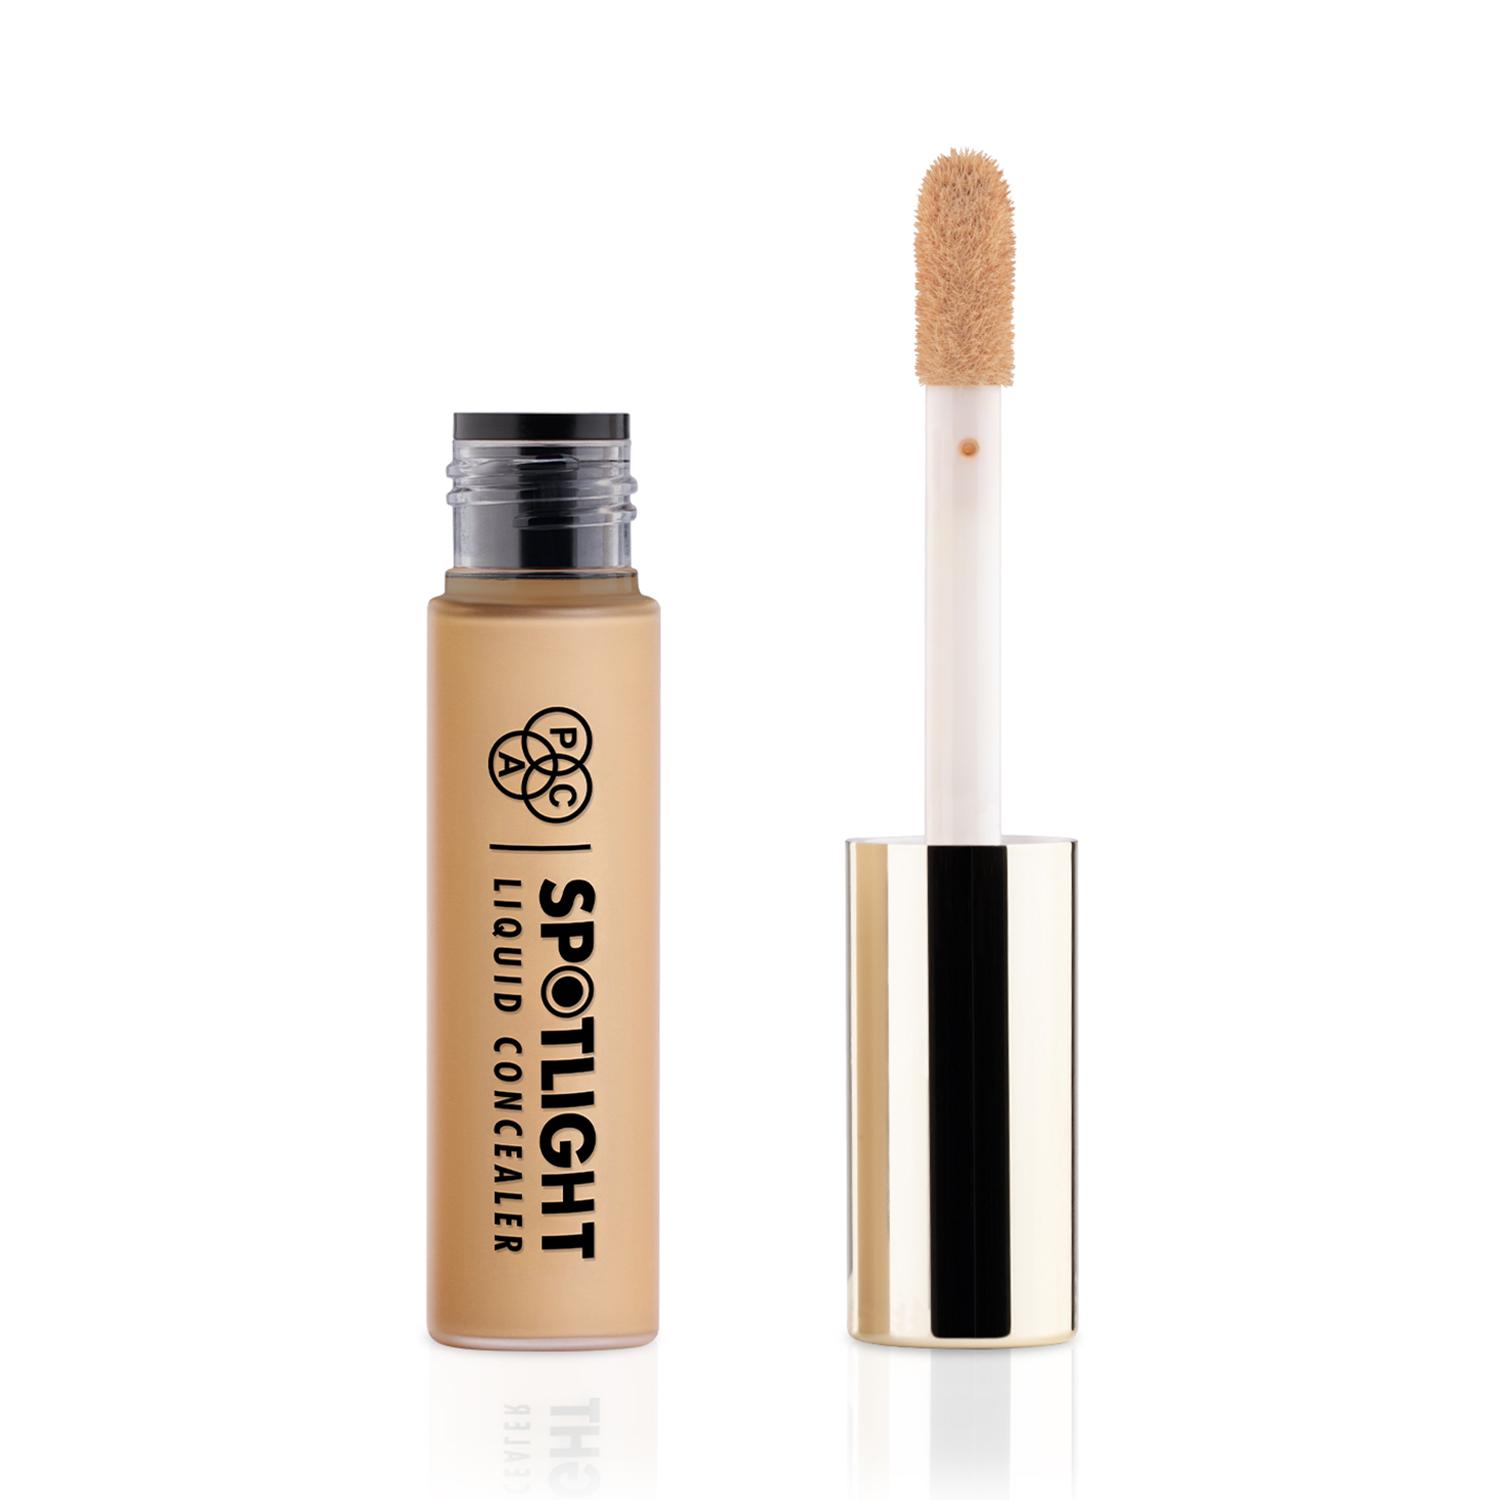 PAC | PAC Spotlight Liquid Concealer - 08 Barely Nude (15g)